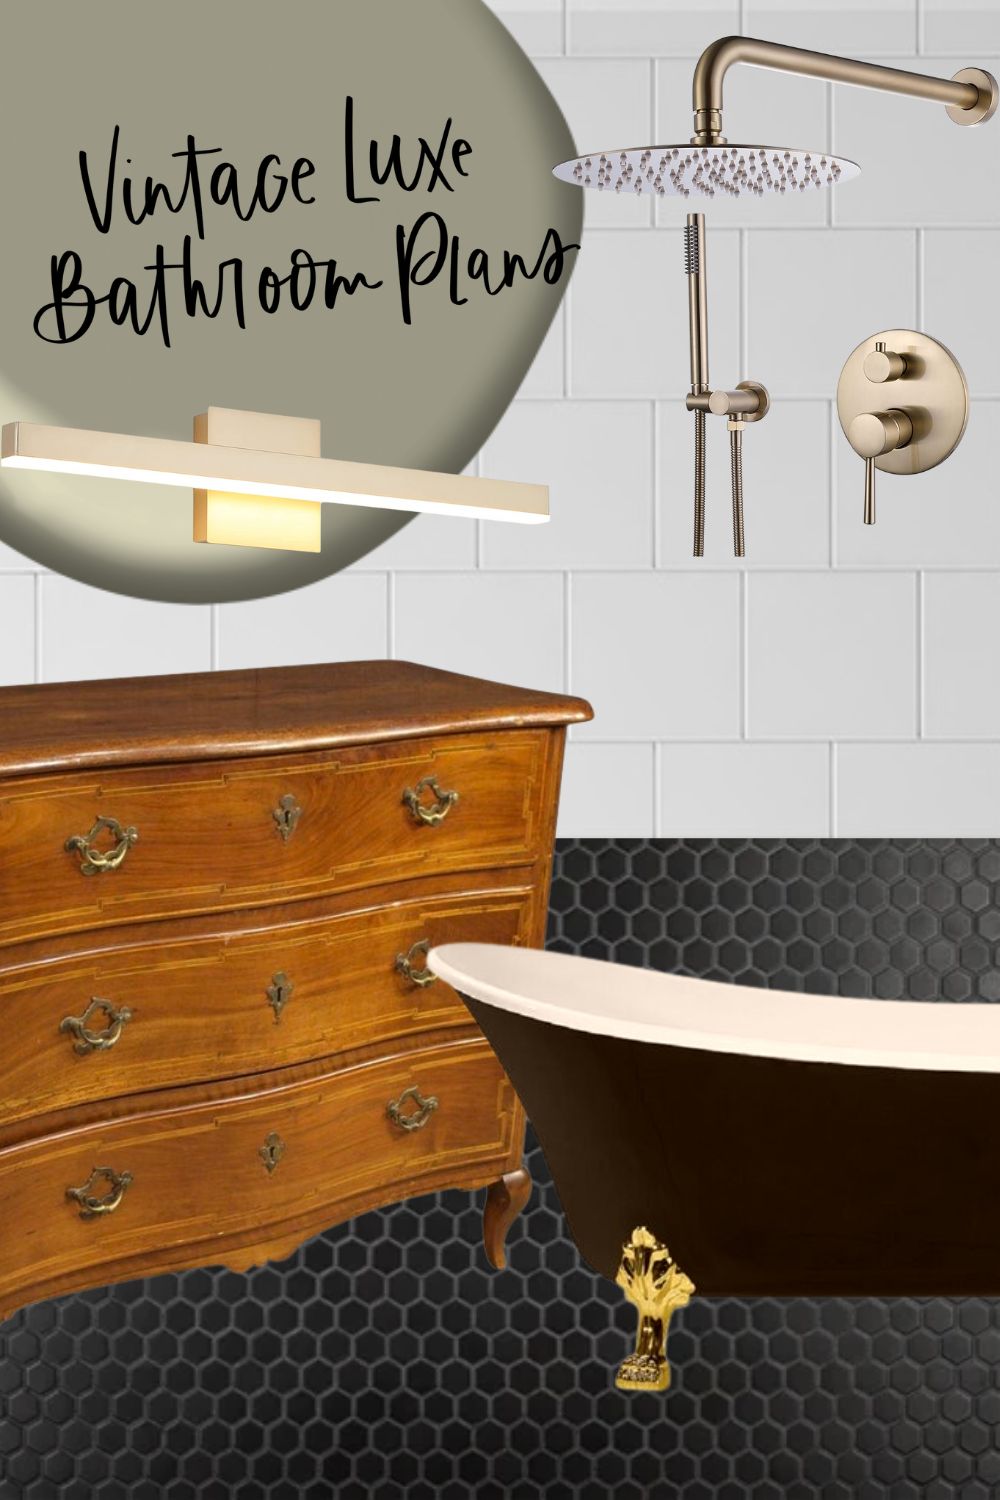 Vintage Luxe bathroom plans for a remodel